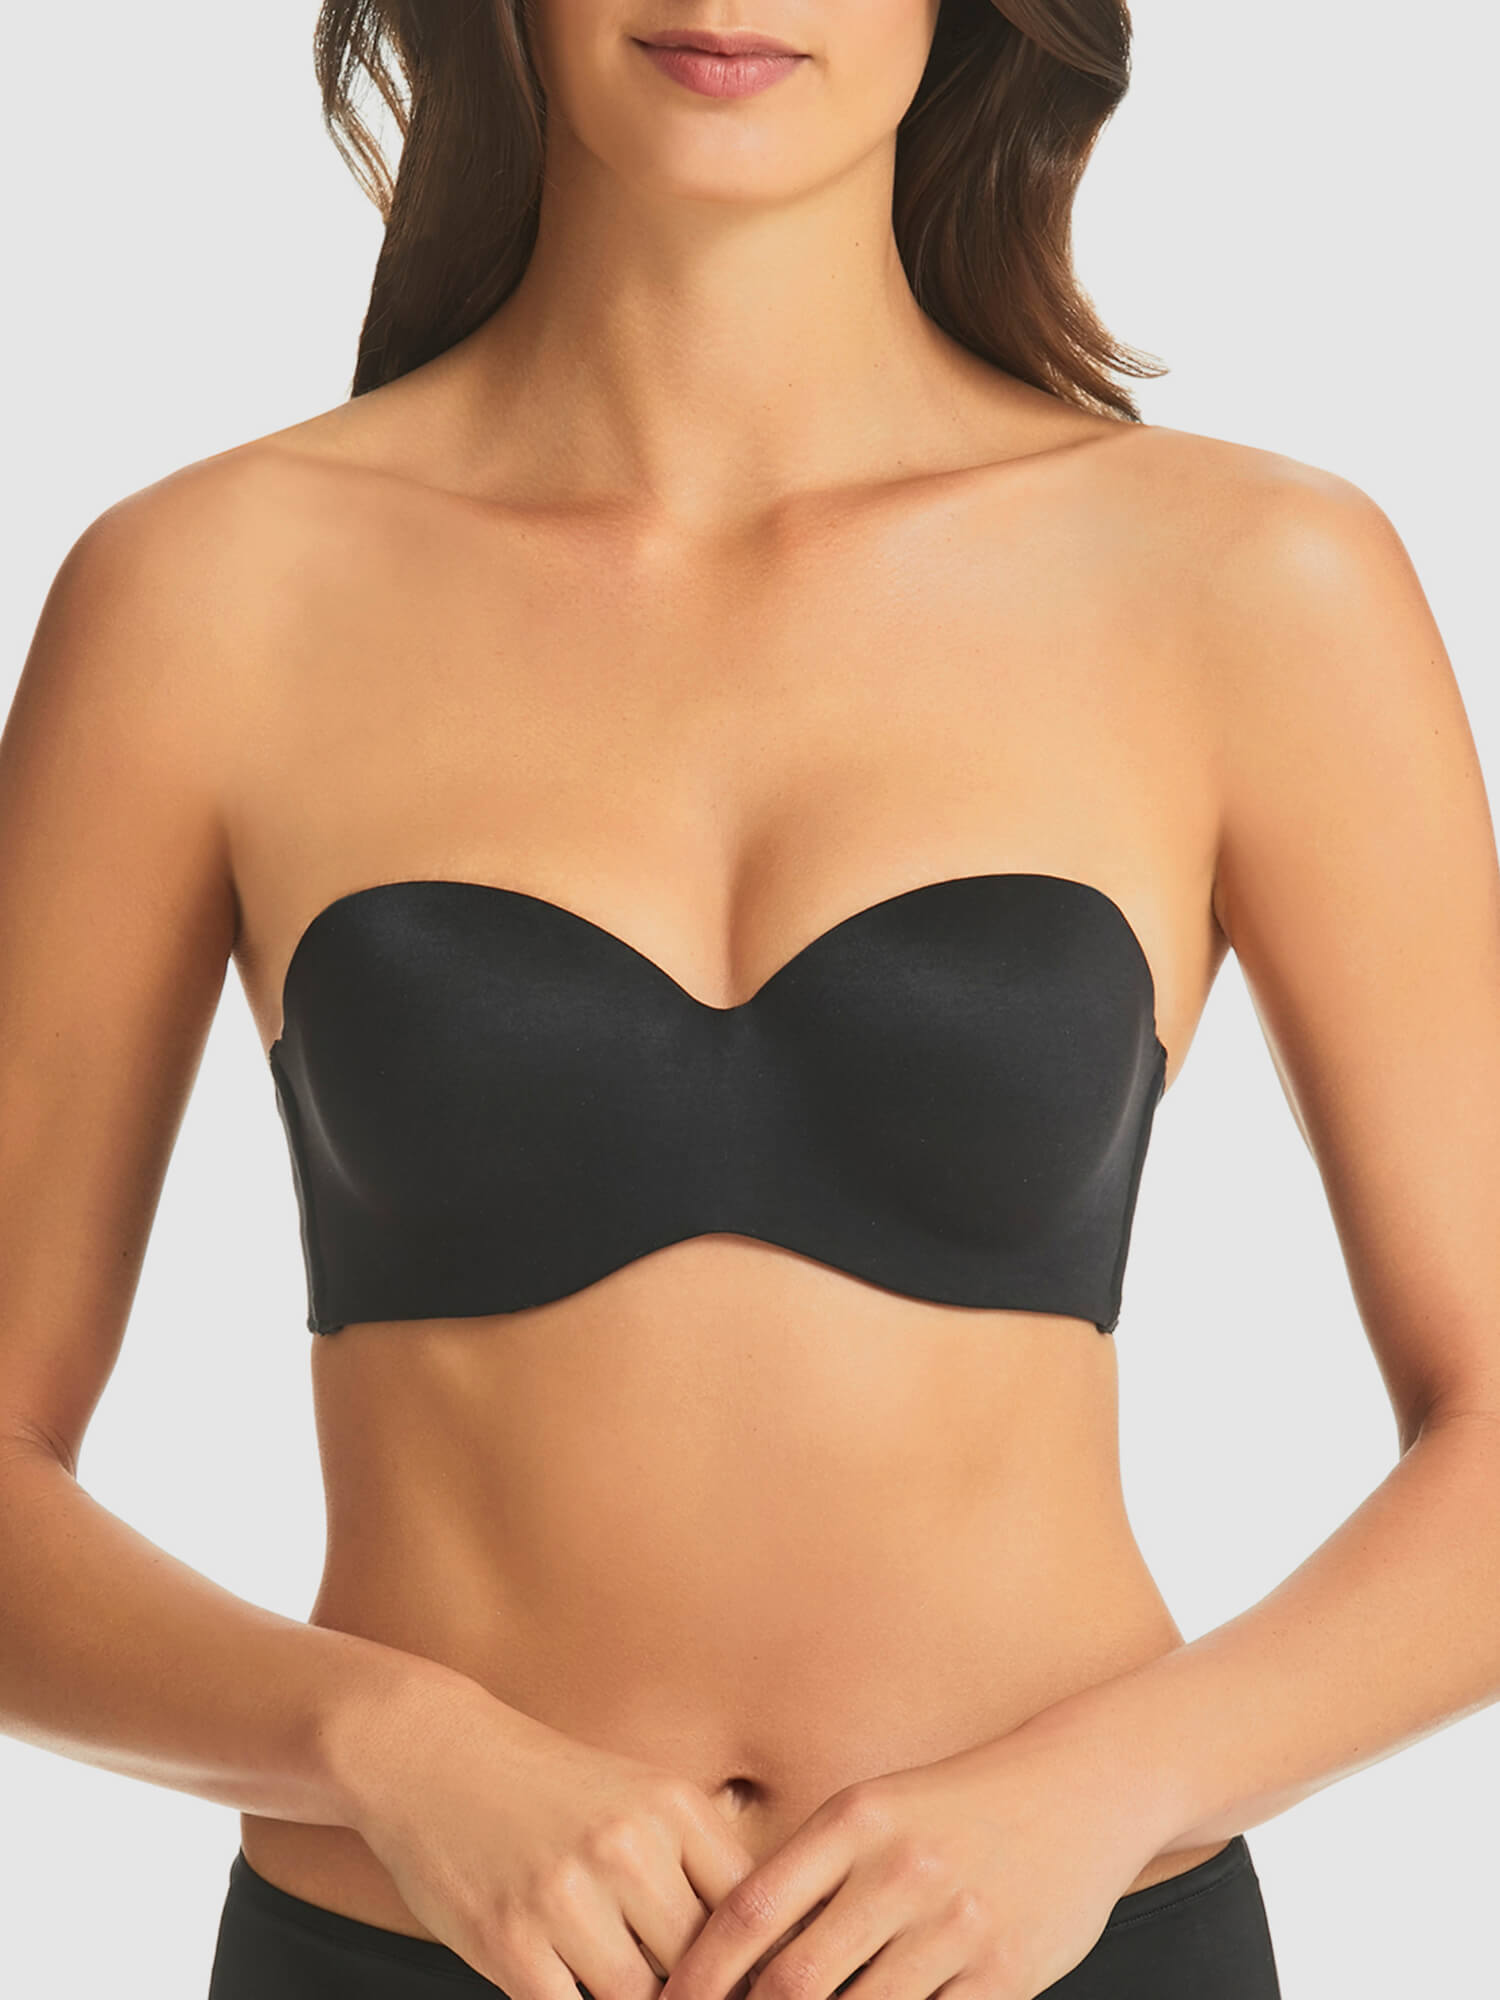 The Most Comfortable Strapless Bras In Australia